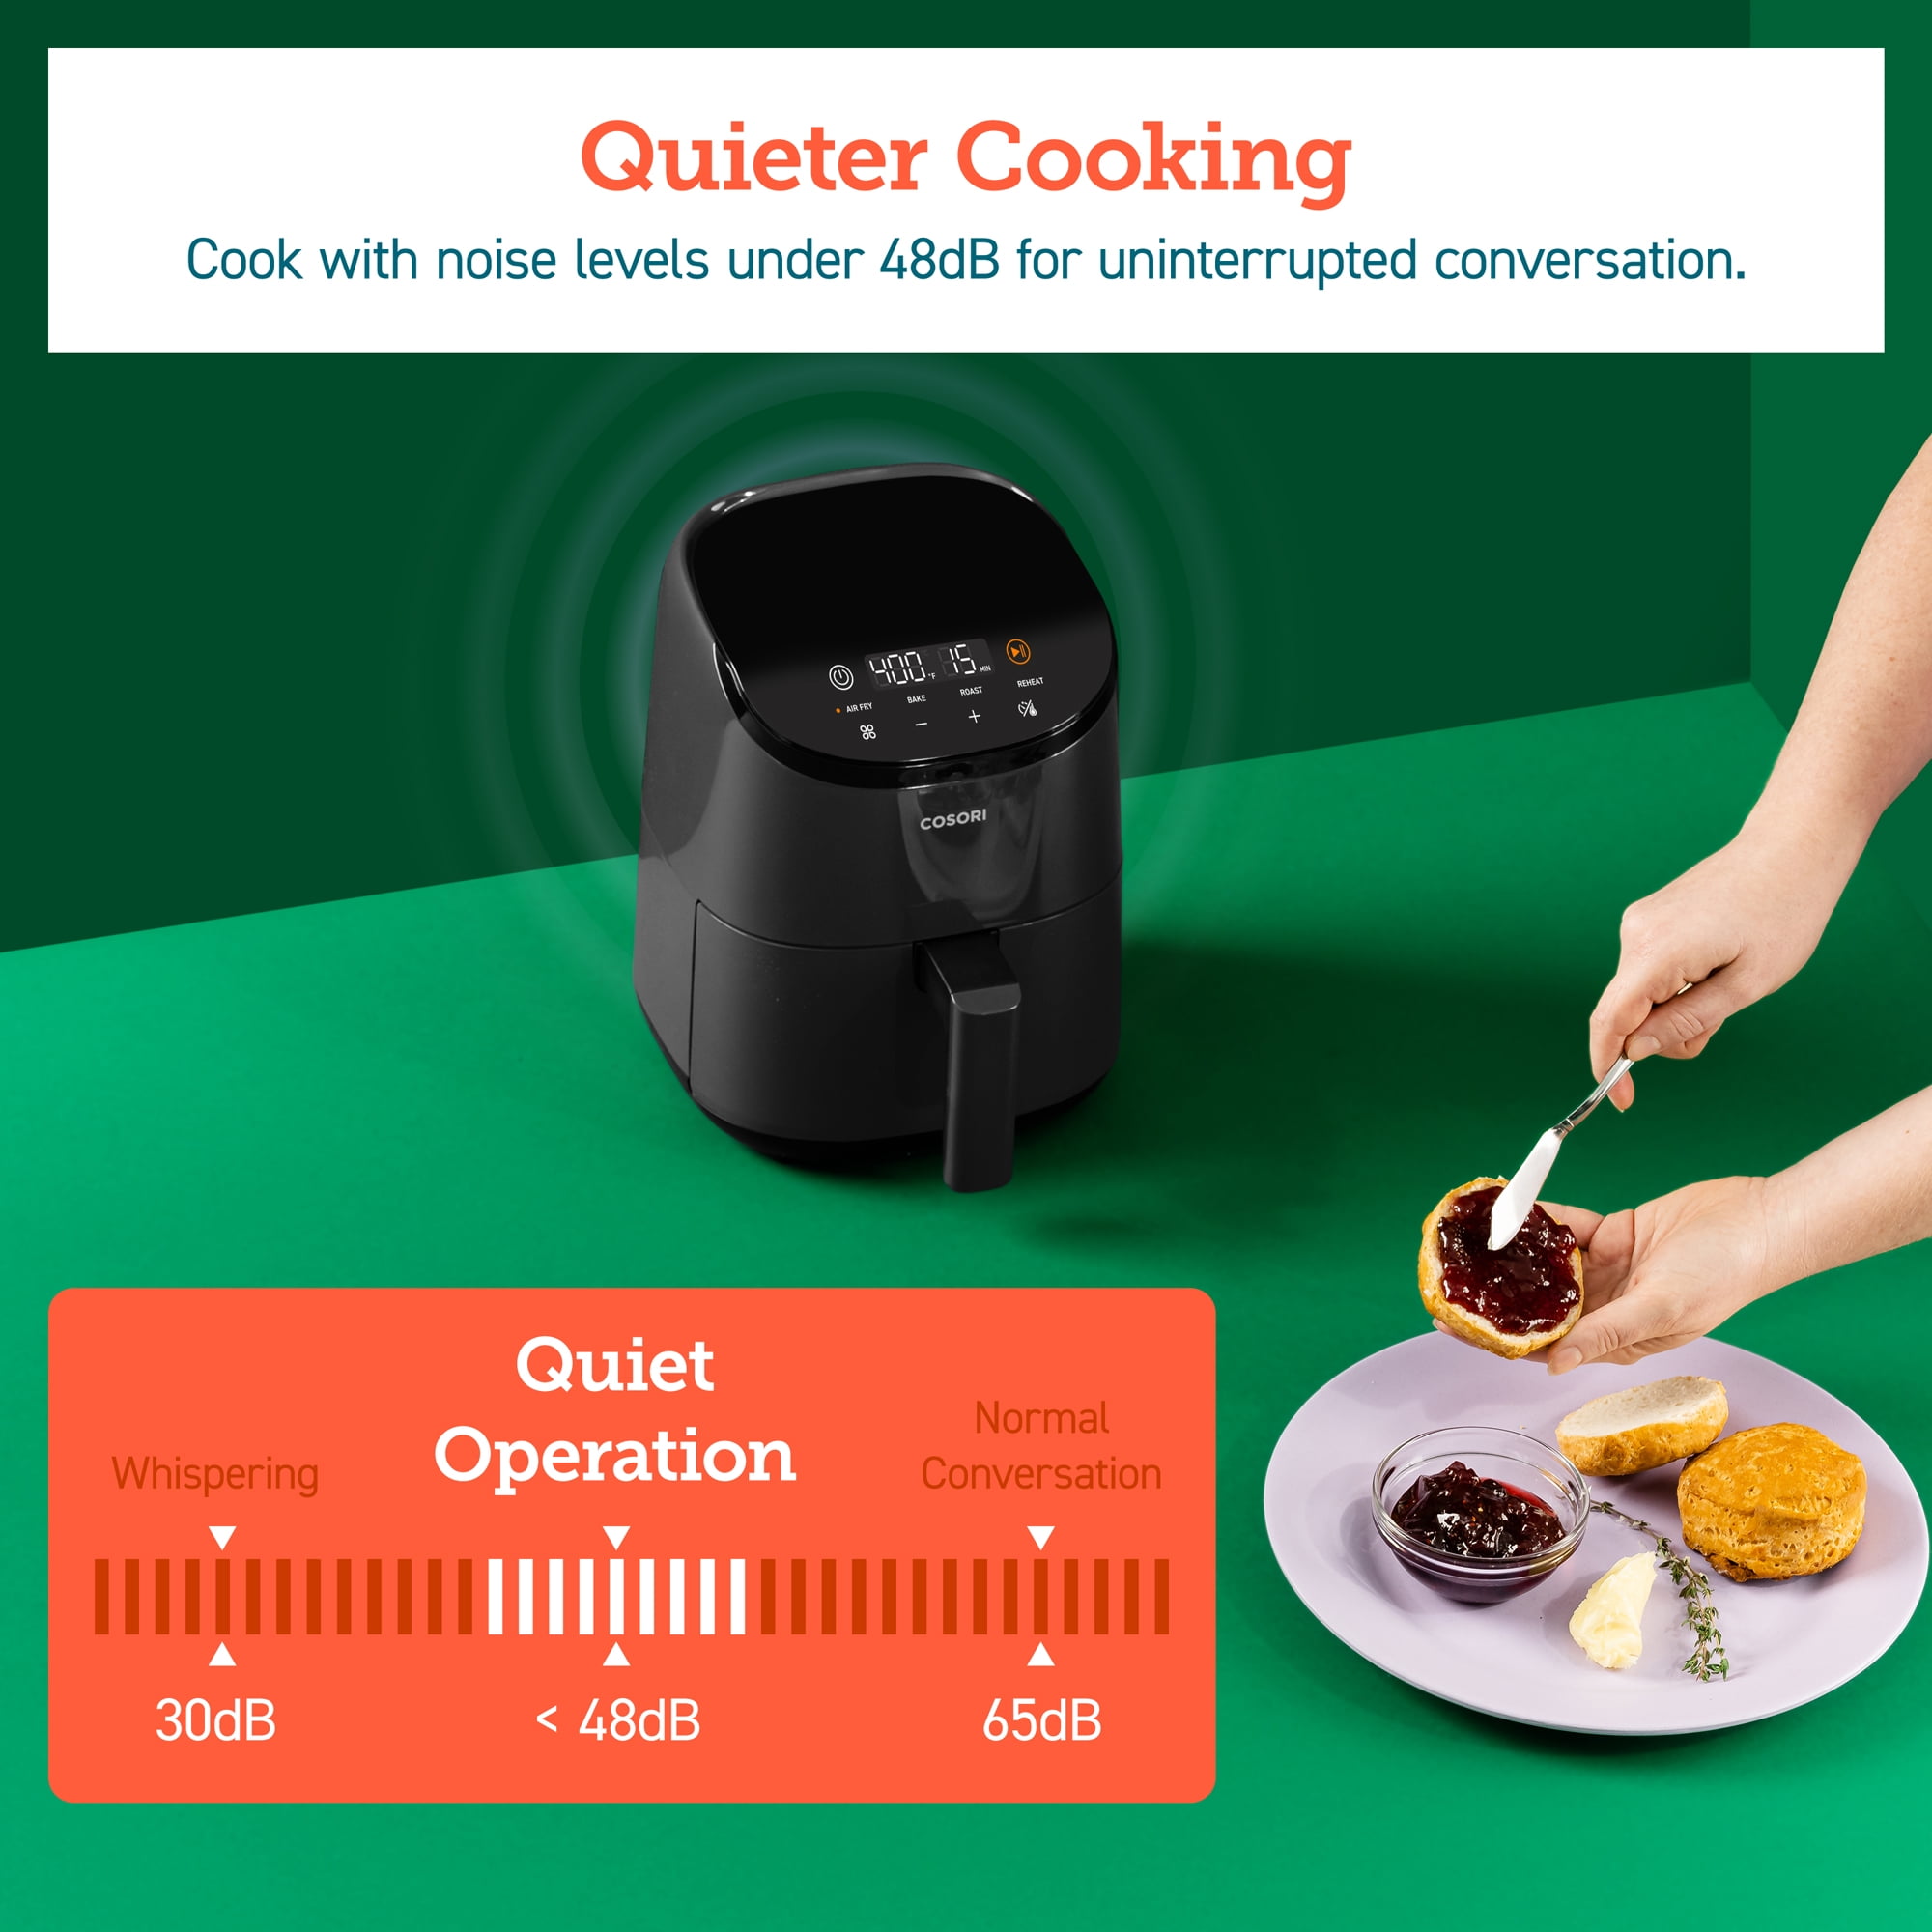 COSORI Small Air Fryer Oven 2.1 Qt, 4-in-1 Mini Airfryer, Bake